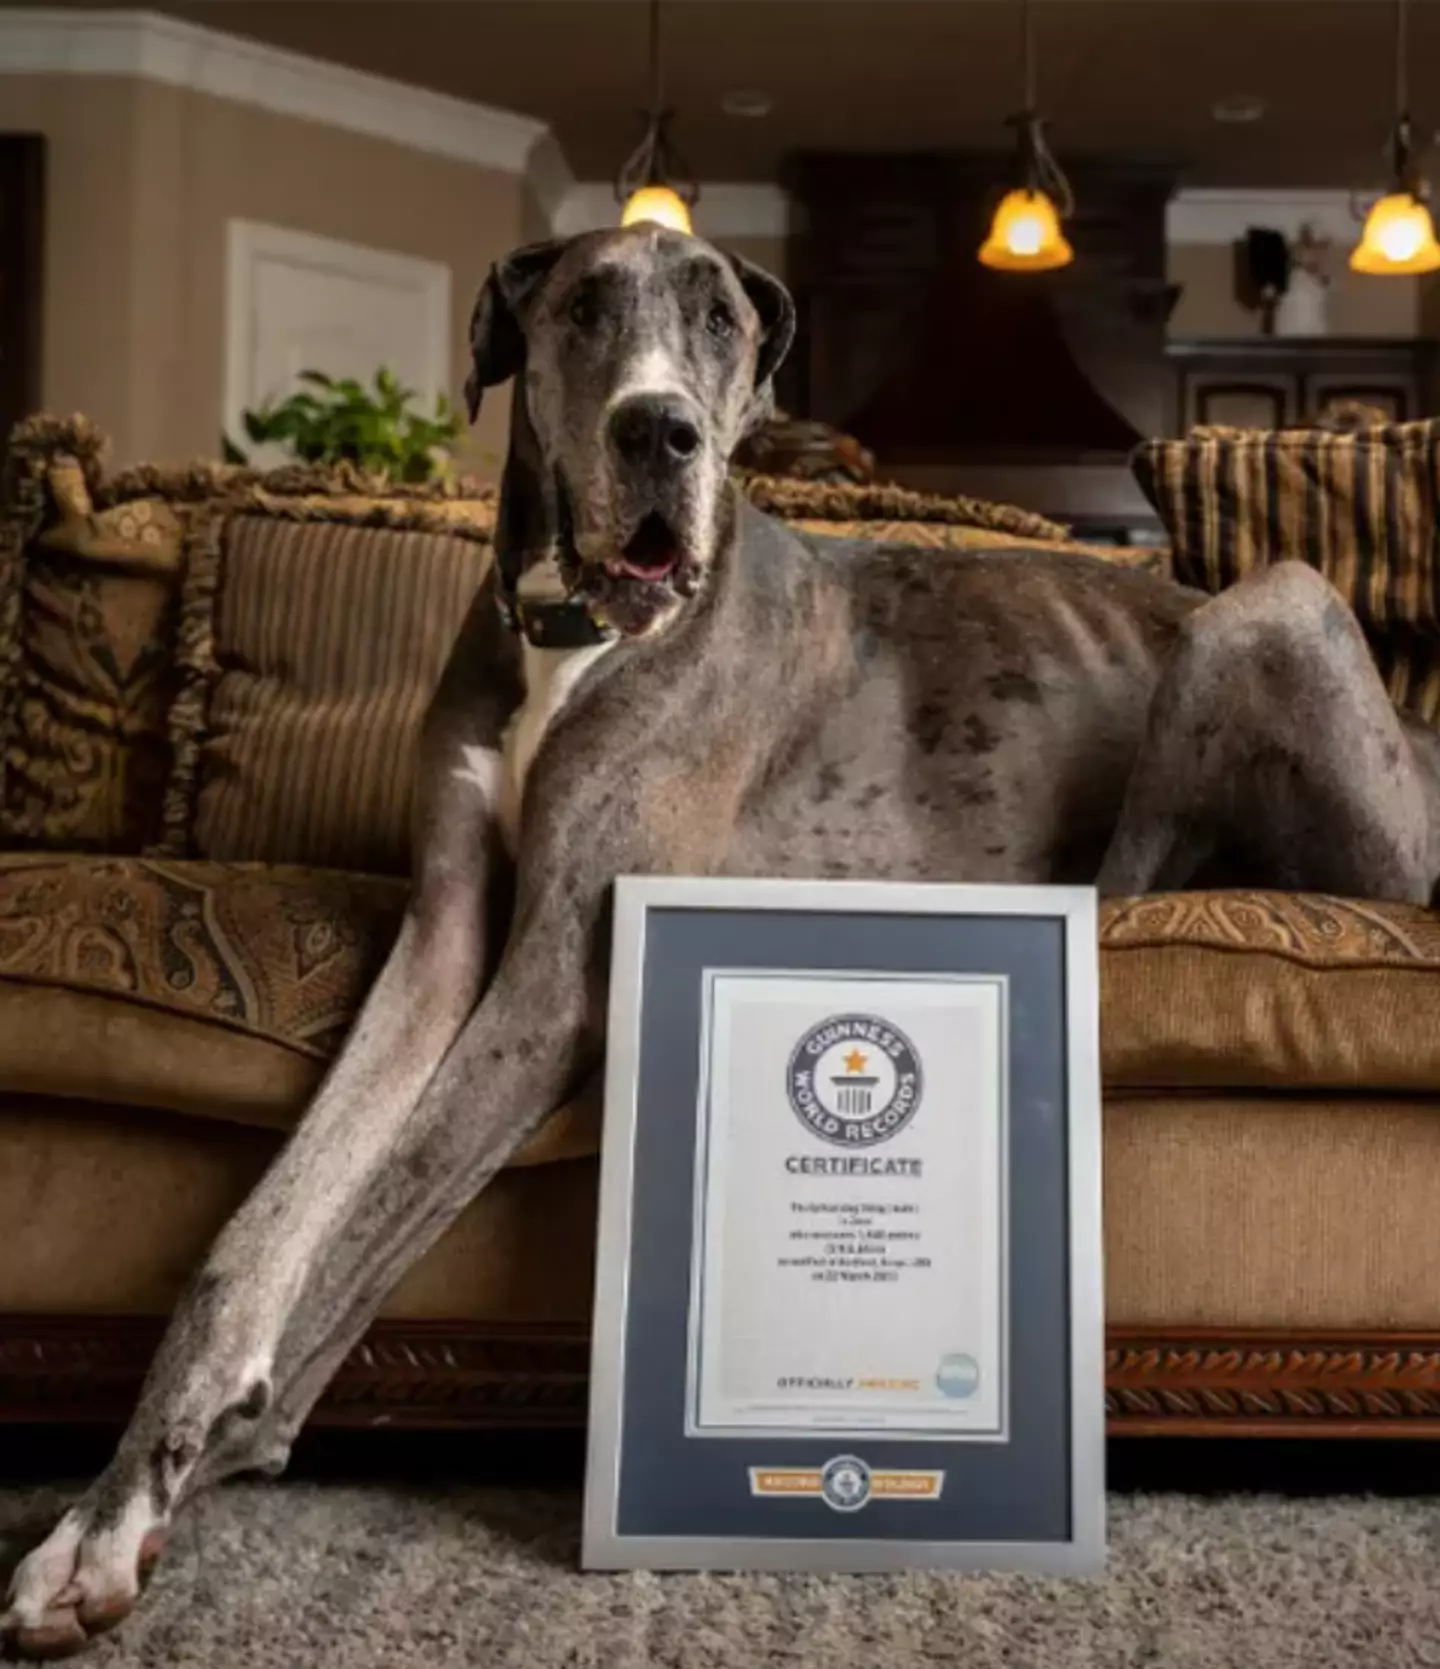 Zeus from Texas has taken the title of the world's tallest living male dog.